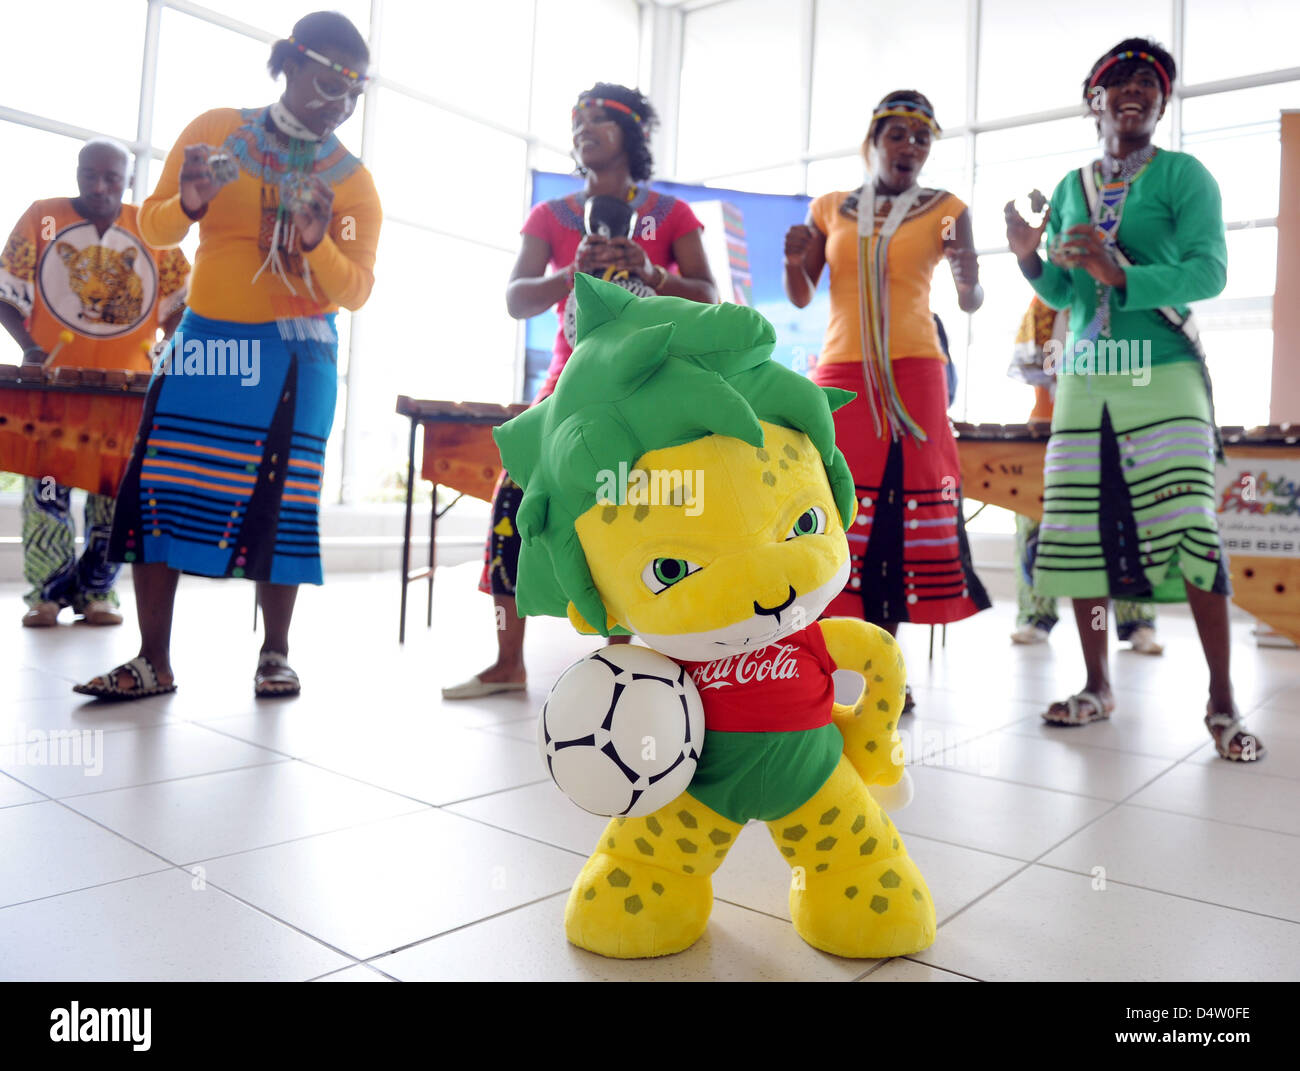 Dancers and Zakumi, mascot of FIFA 2010 World Cup, at Nelson Mandela Bay stadium in Port Elizabeth, South Africa, 06 December 2009. The stadium will be the venue for five group matches, one round of 16 match, a quarter-finals match and the third-place match during the FIFA 2010 World Cup. Photo: Bernd Weissbrod Stock Photo